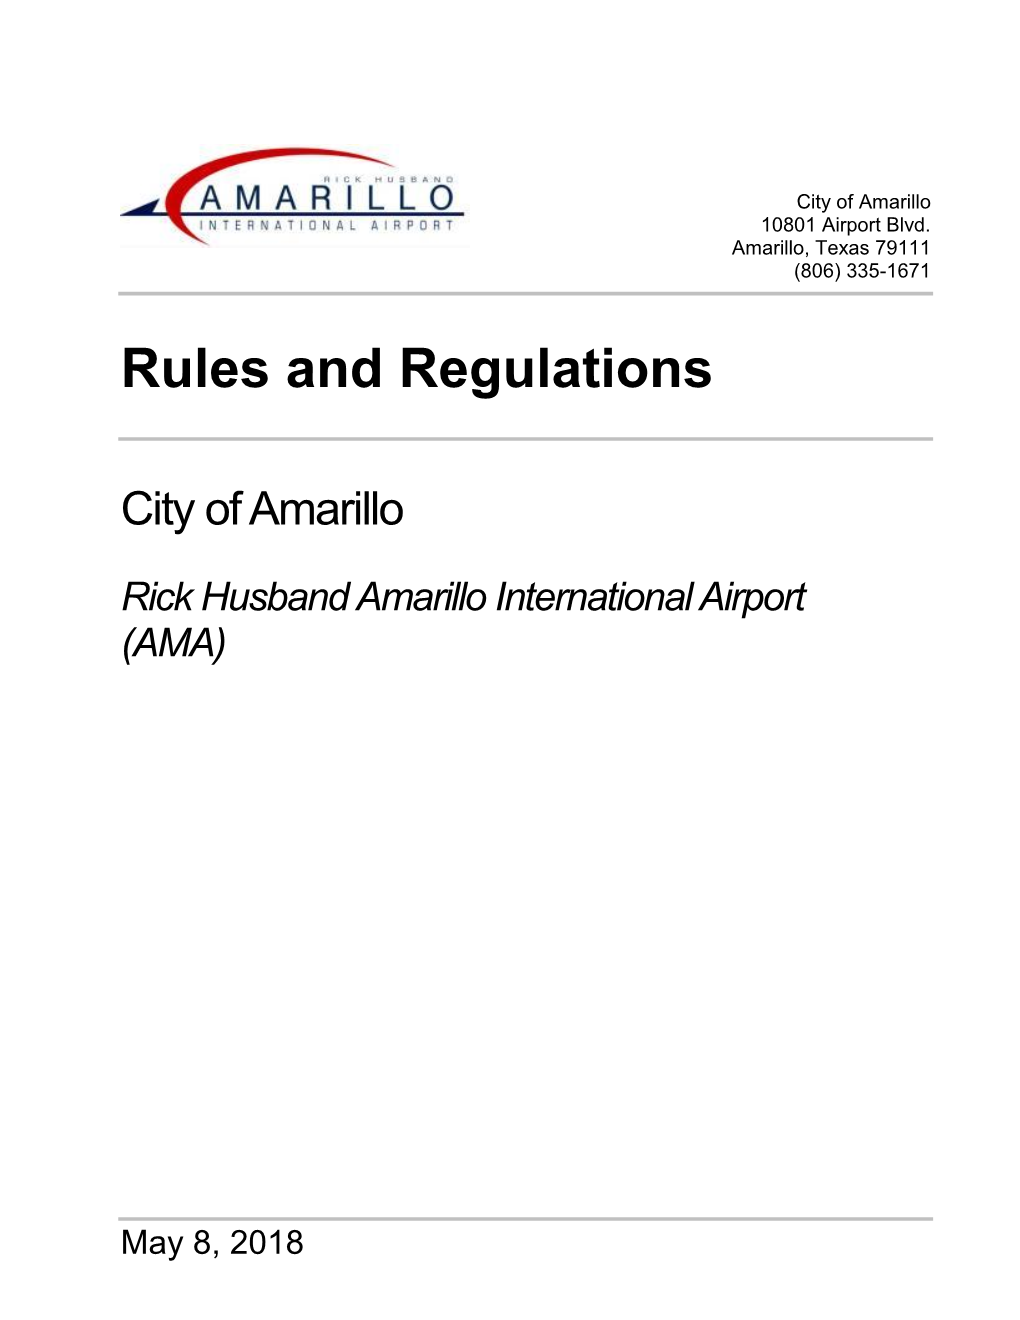 1) Rules and Regulations